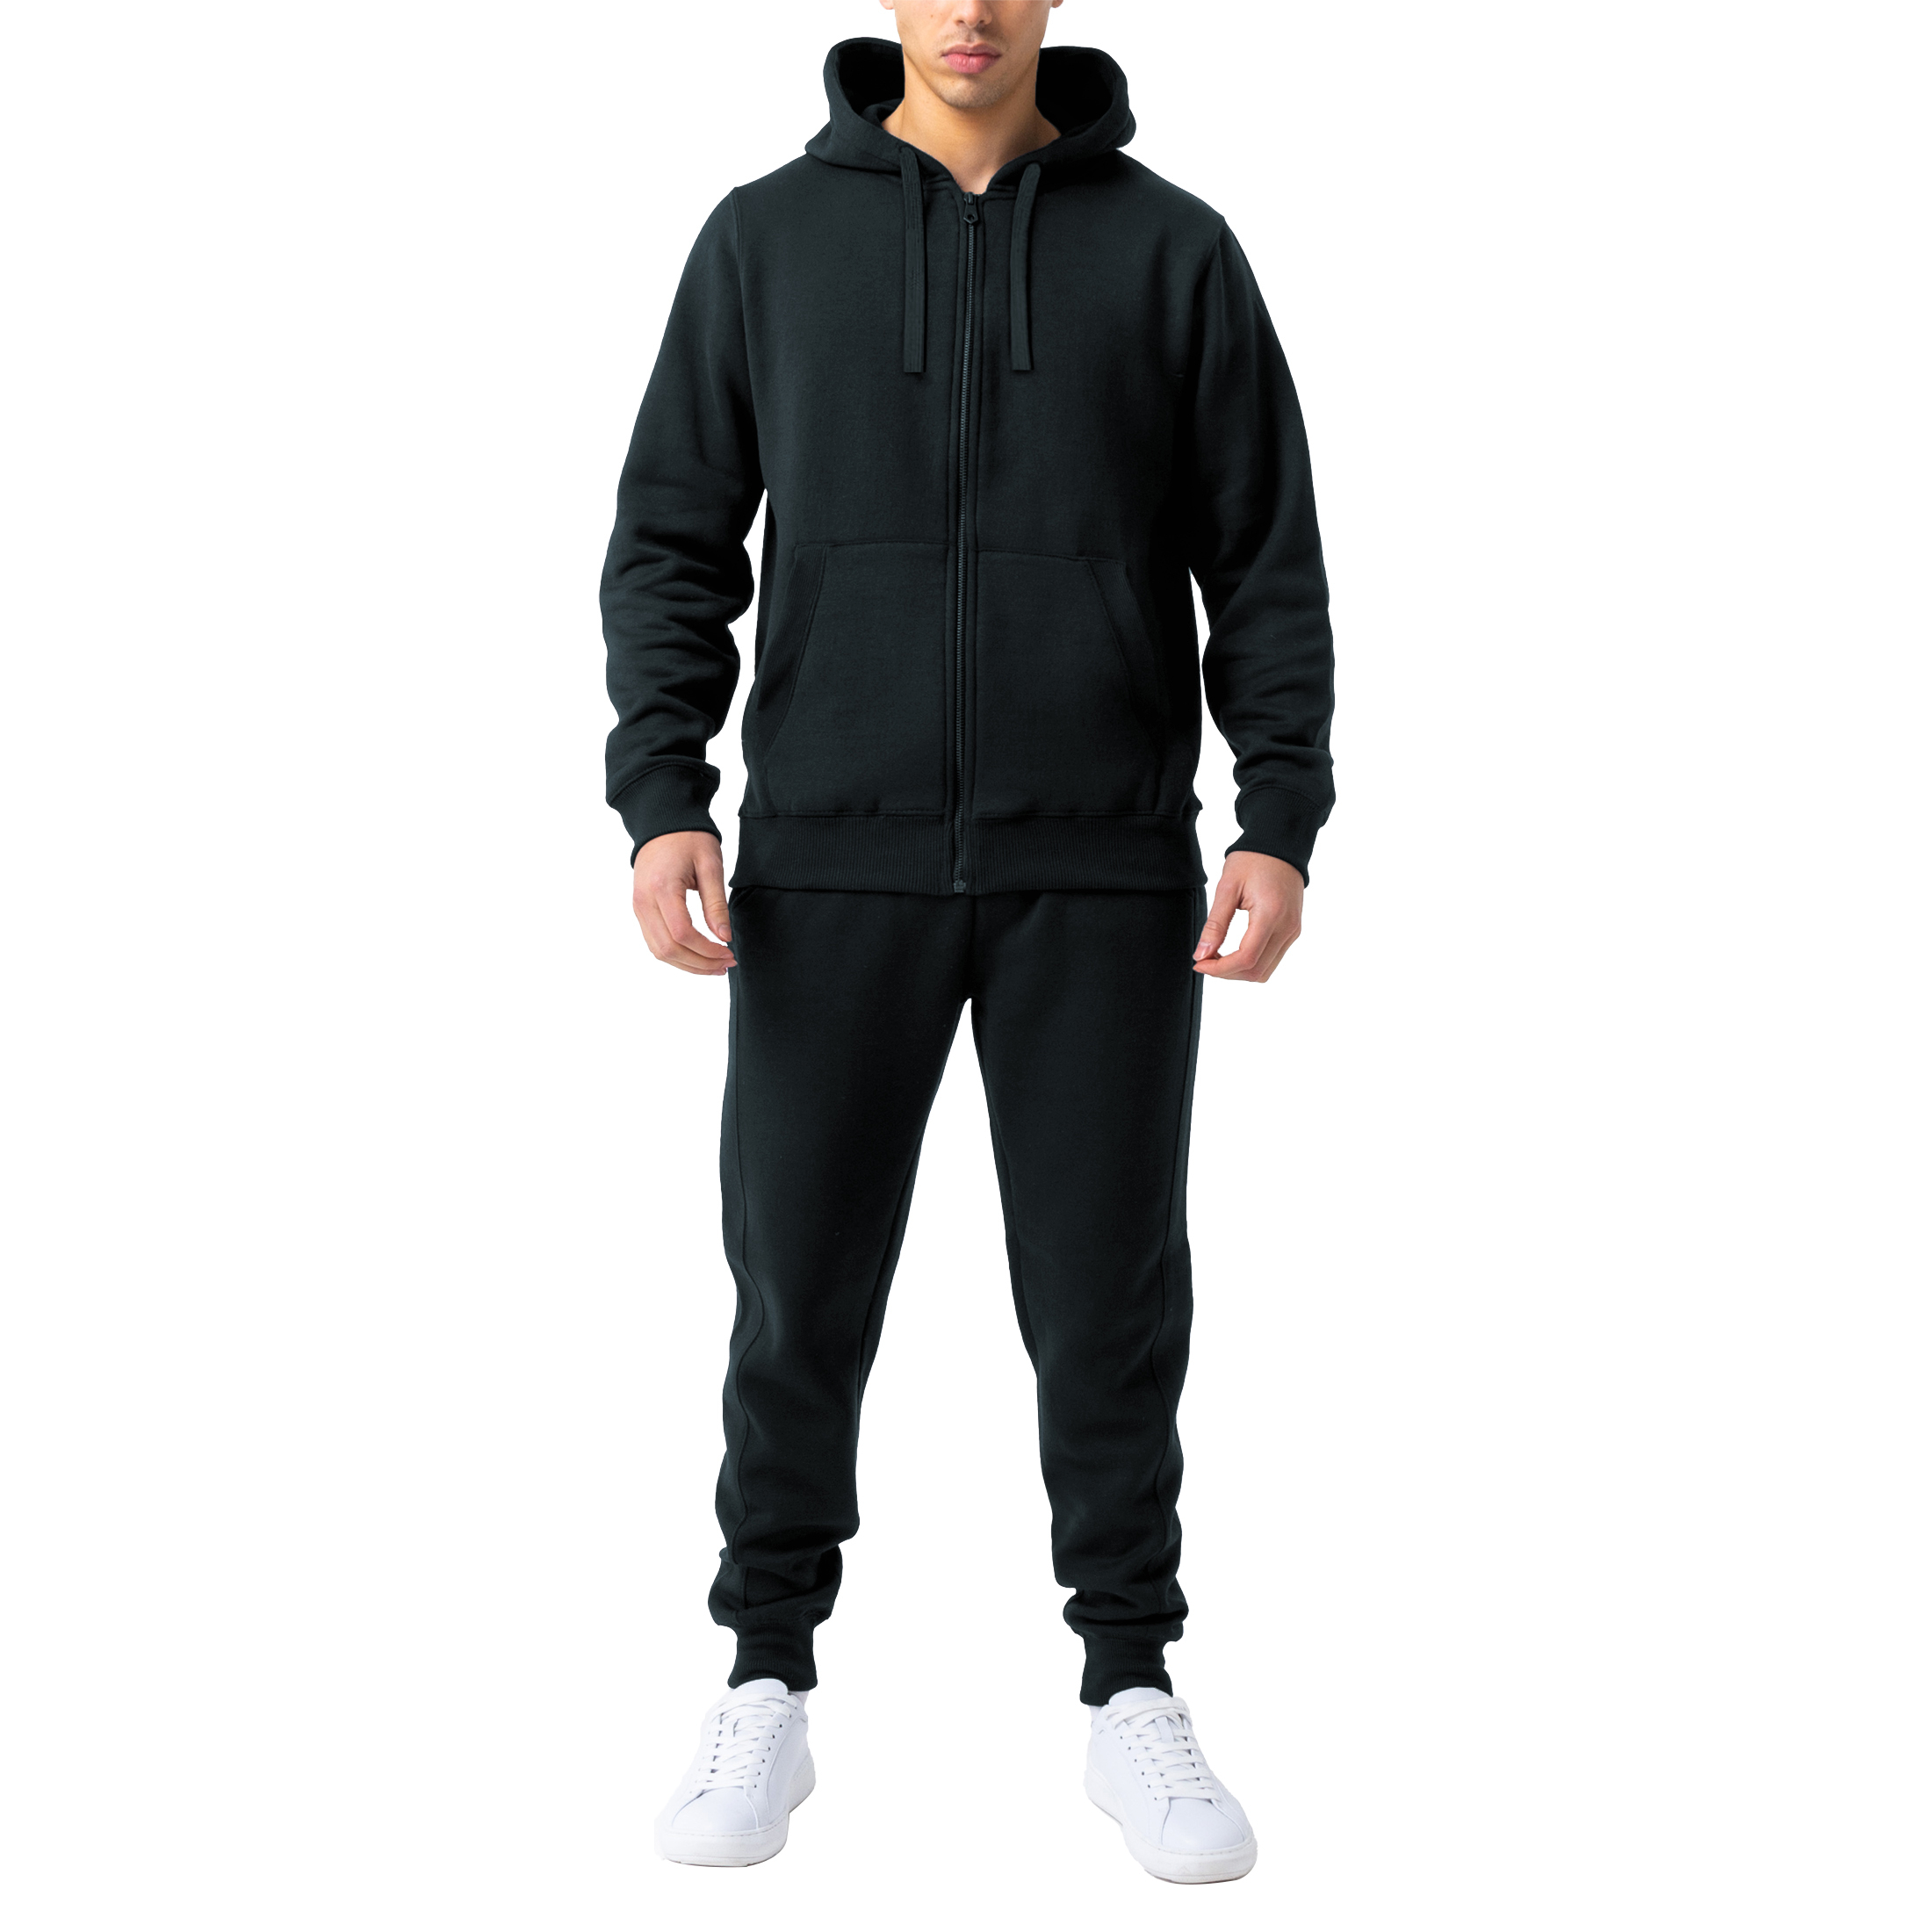 Men's Casual Jogging Athletic Active Full Zip Up Tracksuit - Black, 2X-Large